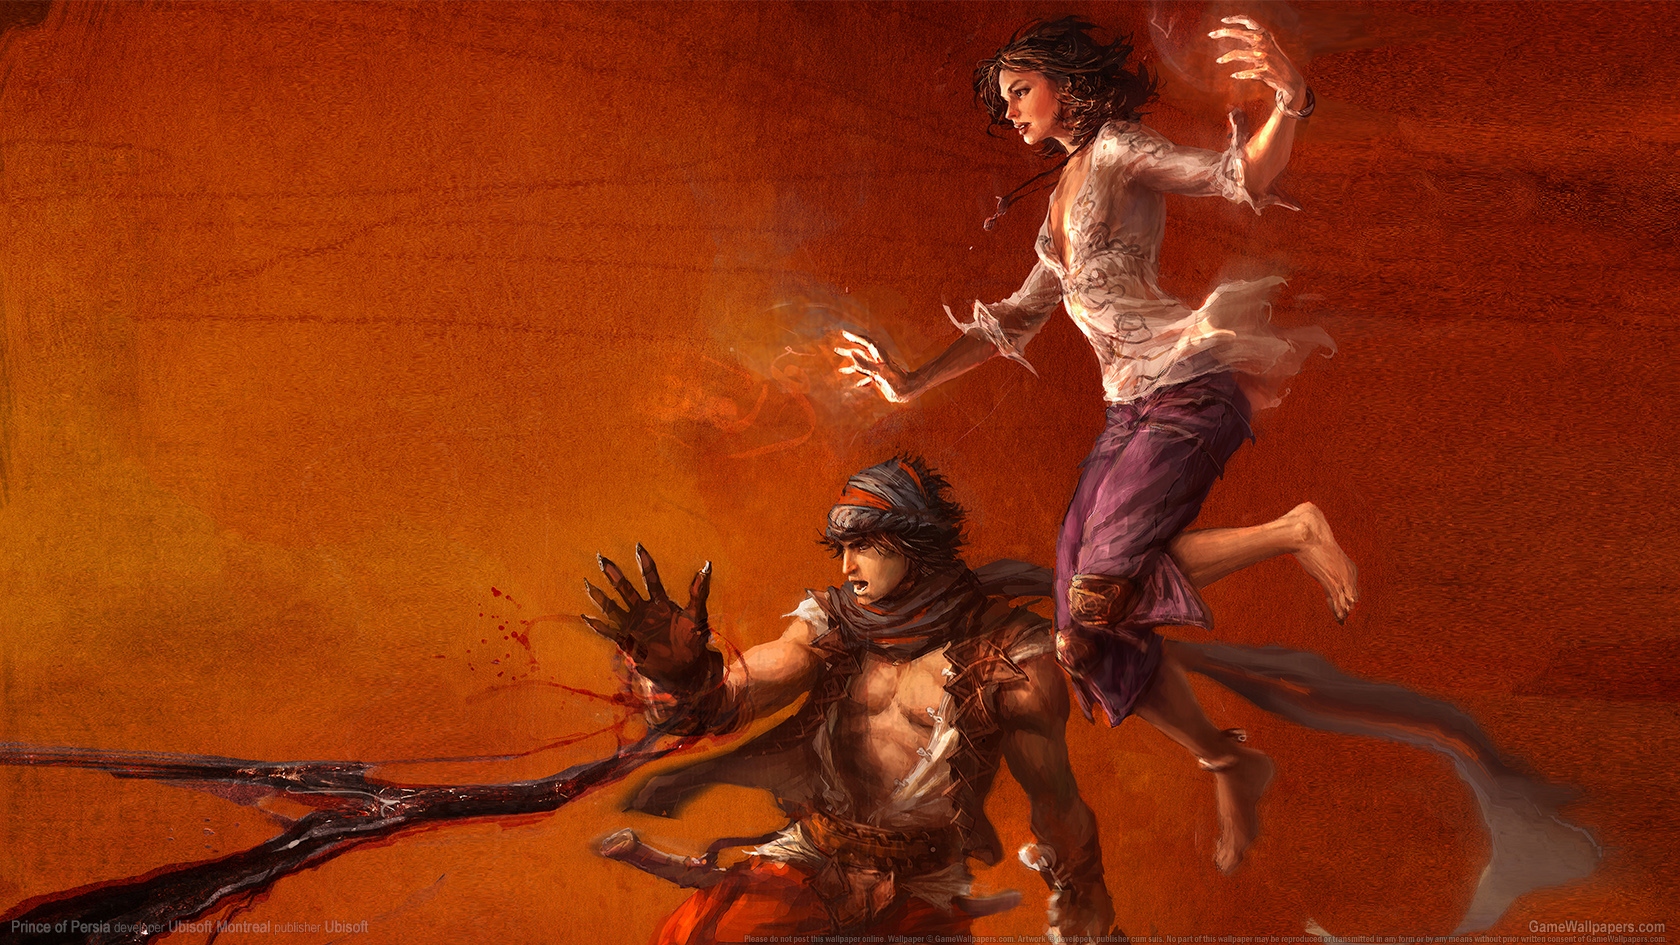 Prince of Persia 1680x945 wallpaper or background 07